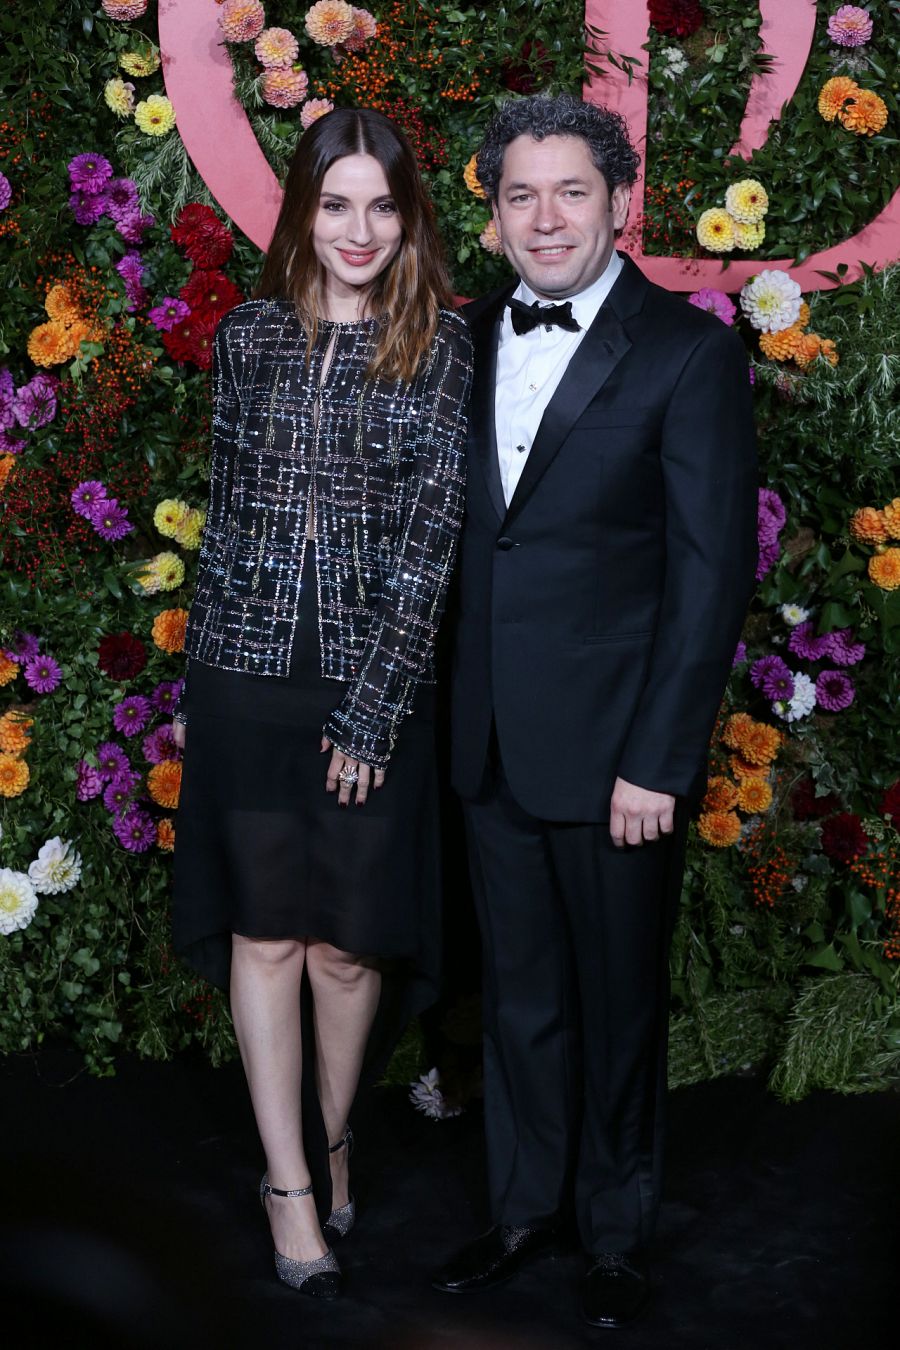 Gustavo Dudamel and Maria Valverde at photocall for premiere of